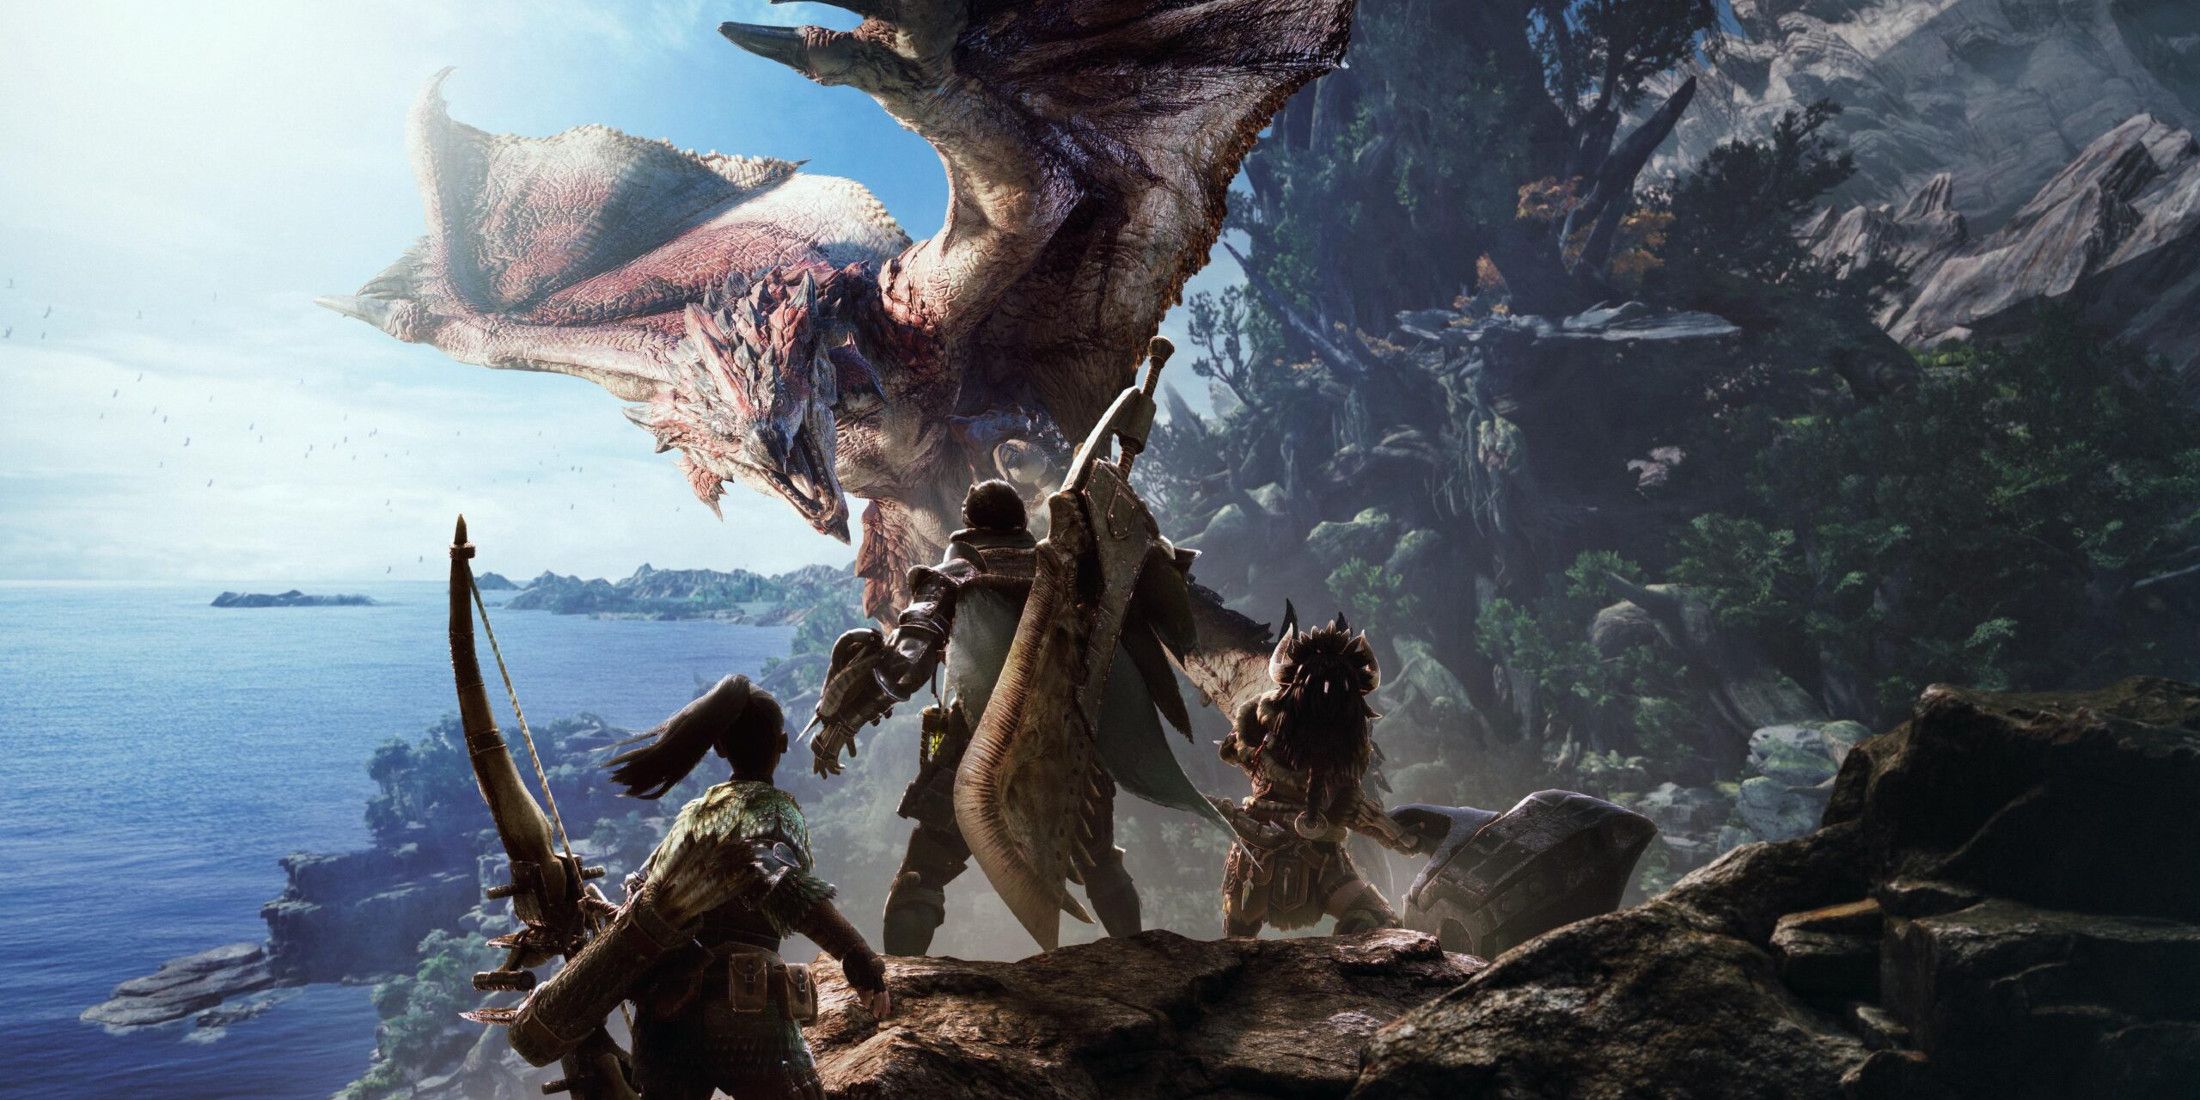 The heroes fighting a monster on a cliffside in Monster Hunter World